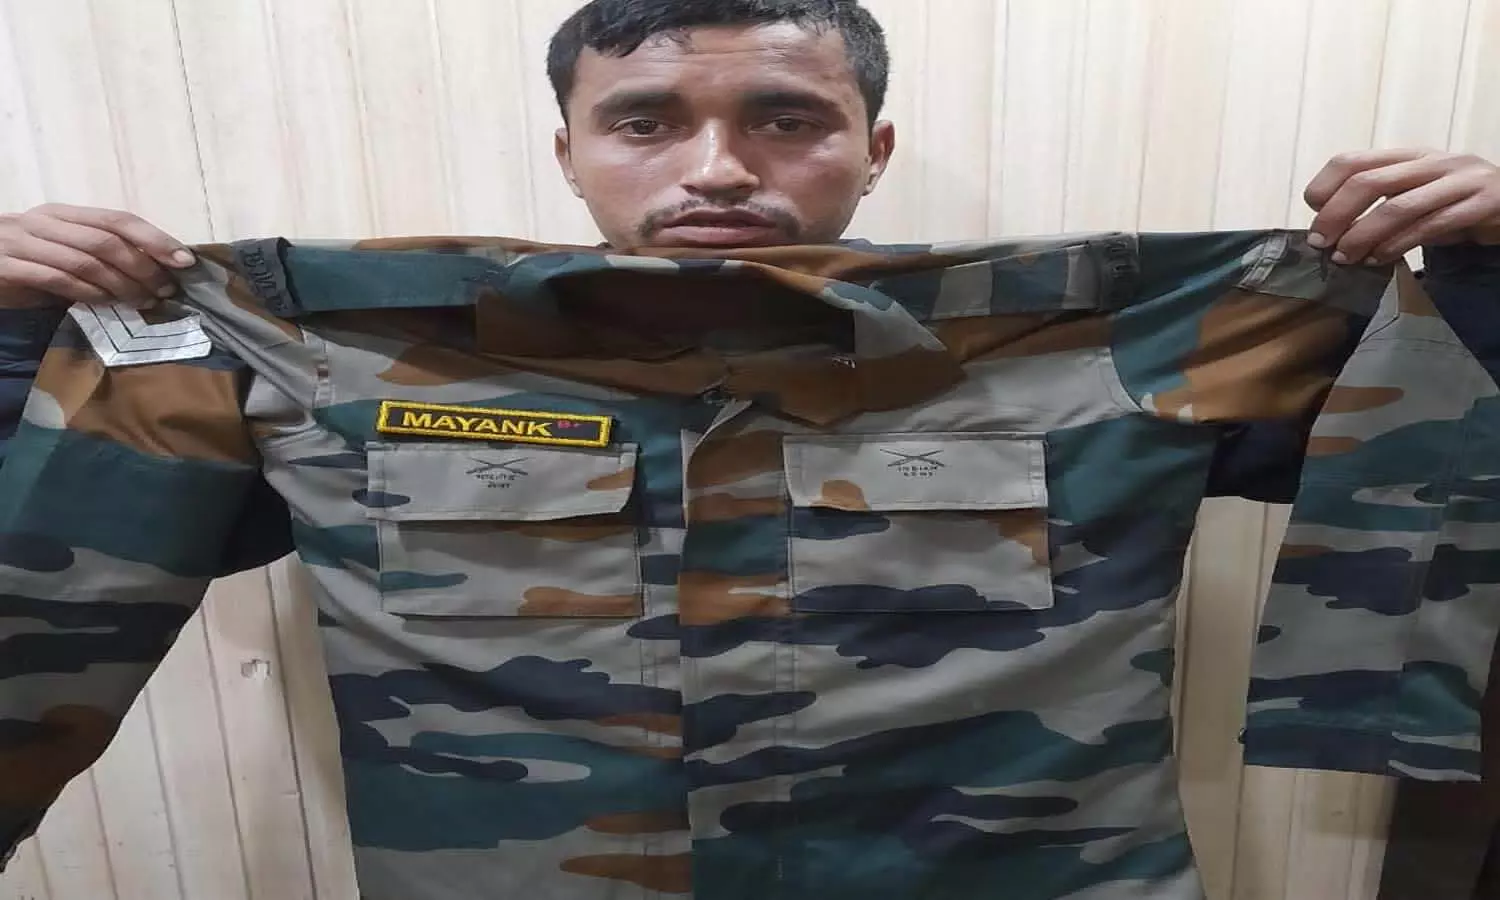 Police arrested the young man who came to cheat wearing army uniform, army uniform and documents were recovered